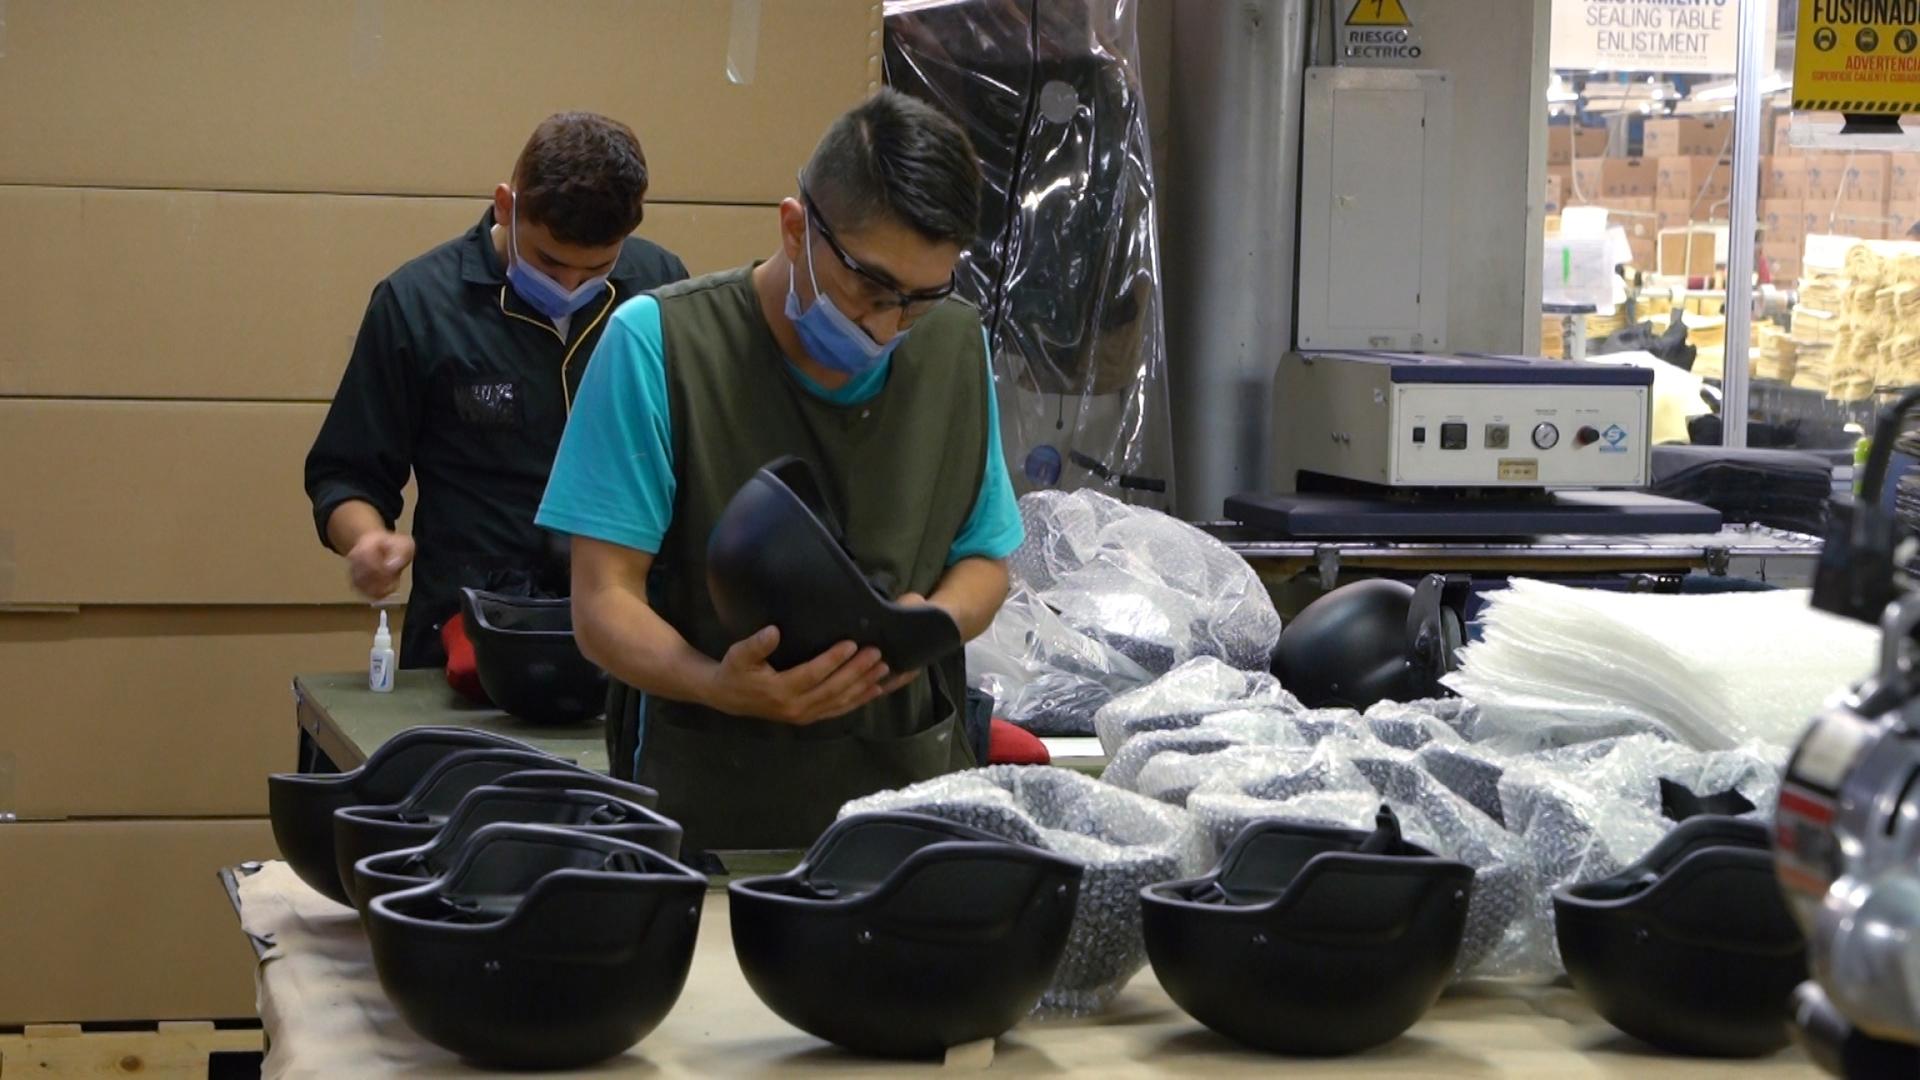 Employees at the MC Armor plant in Bogota, Colombia, work with helmets and other gear meant to protect people especially in conflict and war zones.